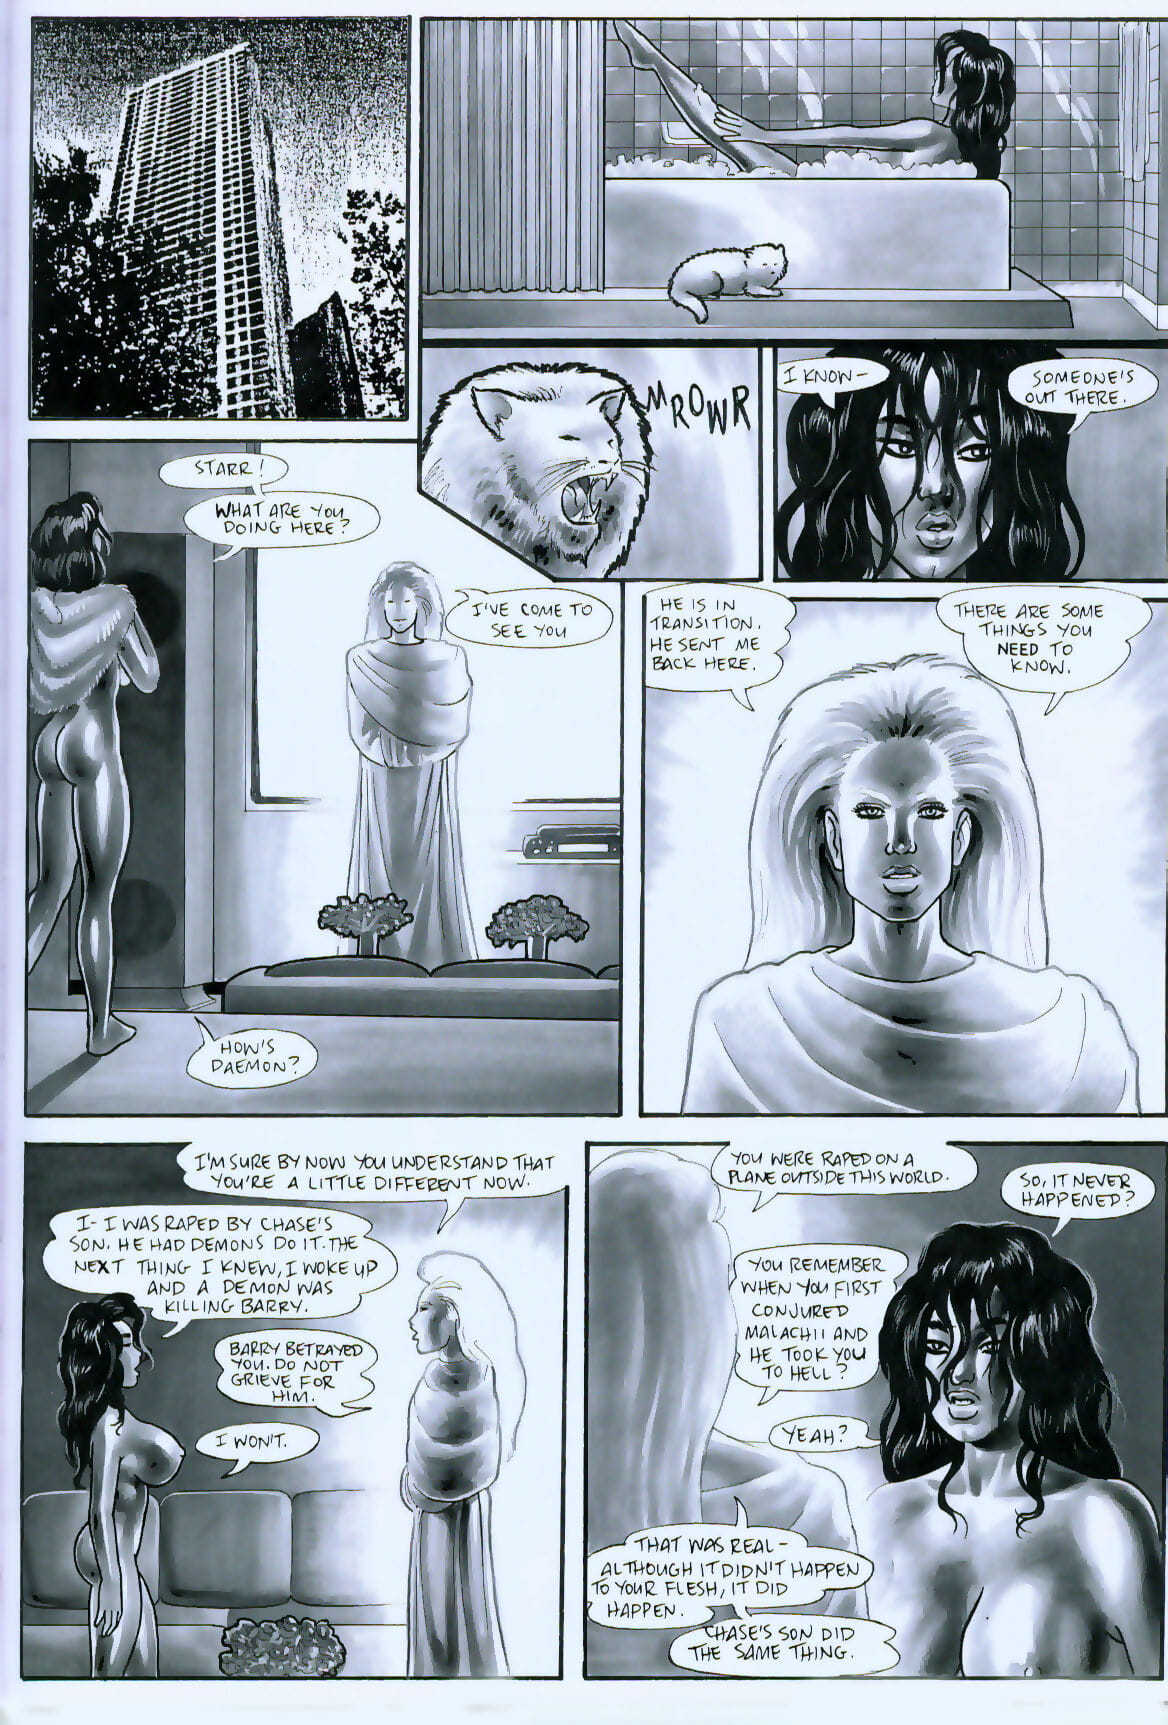 Girl - Rule of Darkness - part 2 page 1